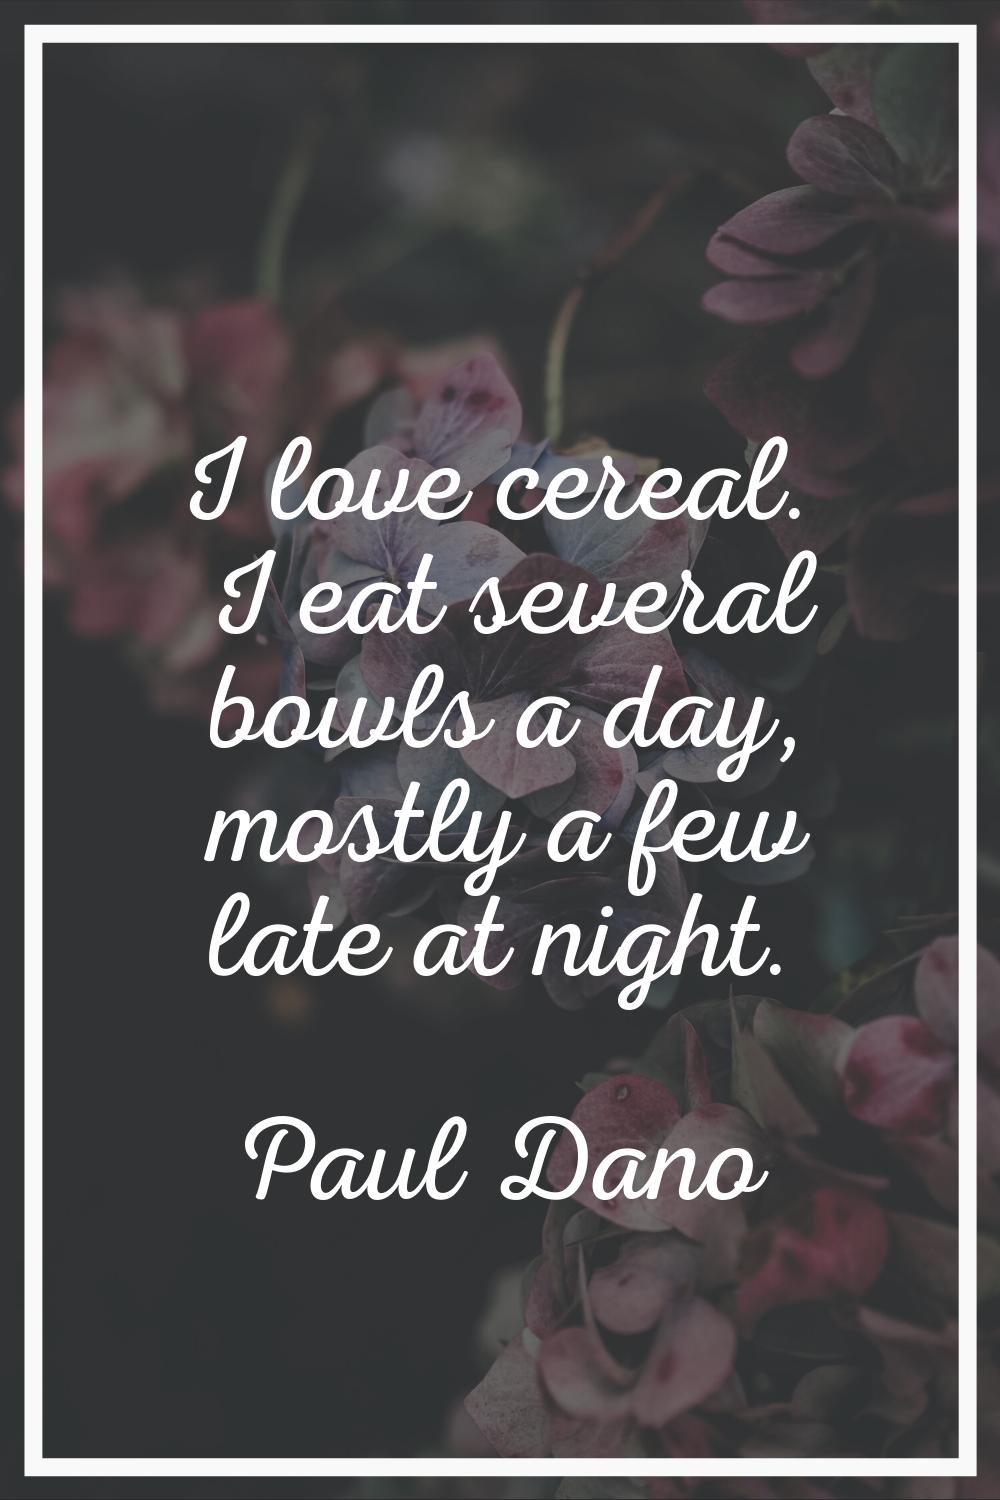 I love cereal. I eat several bowls a day, mostly a few late at night.